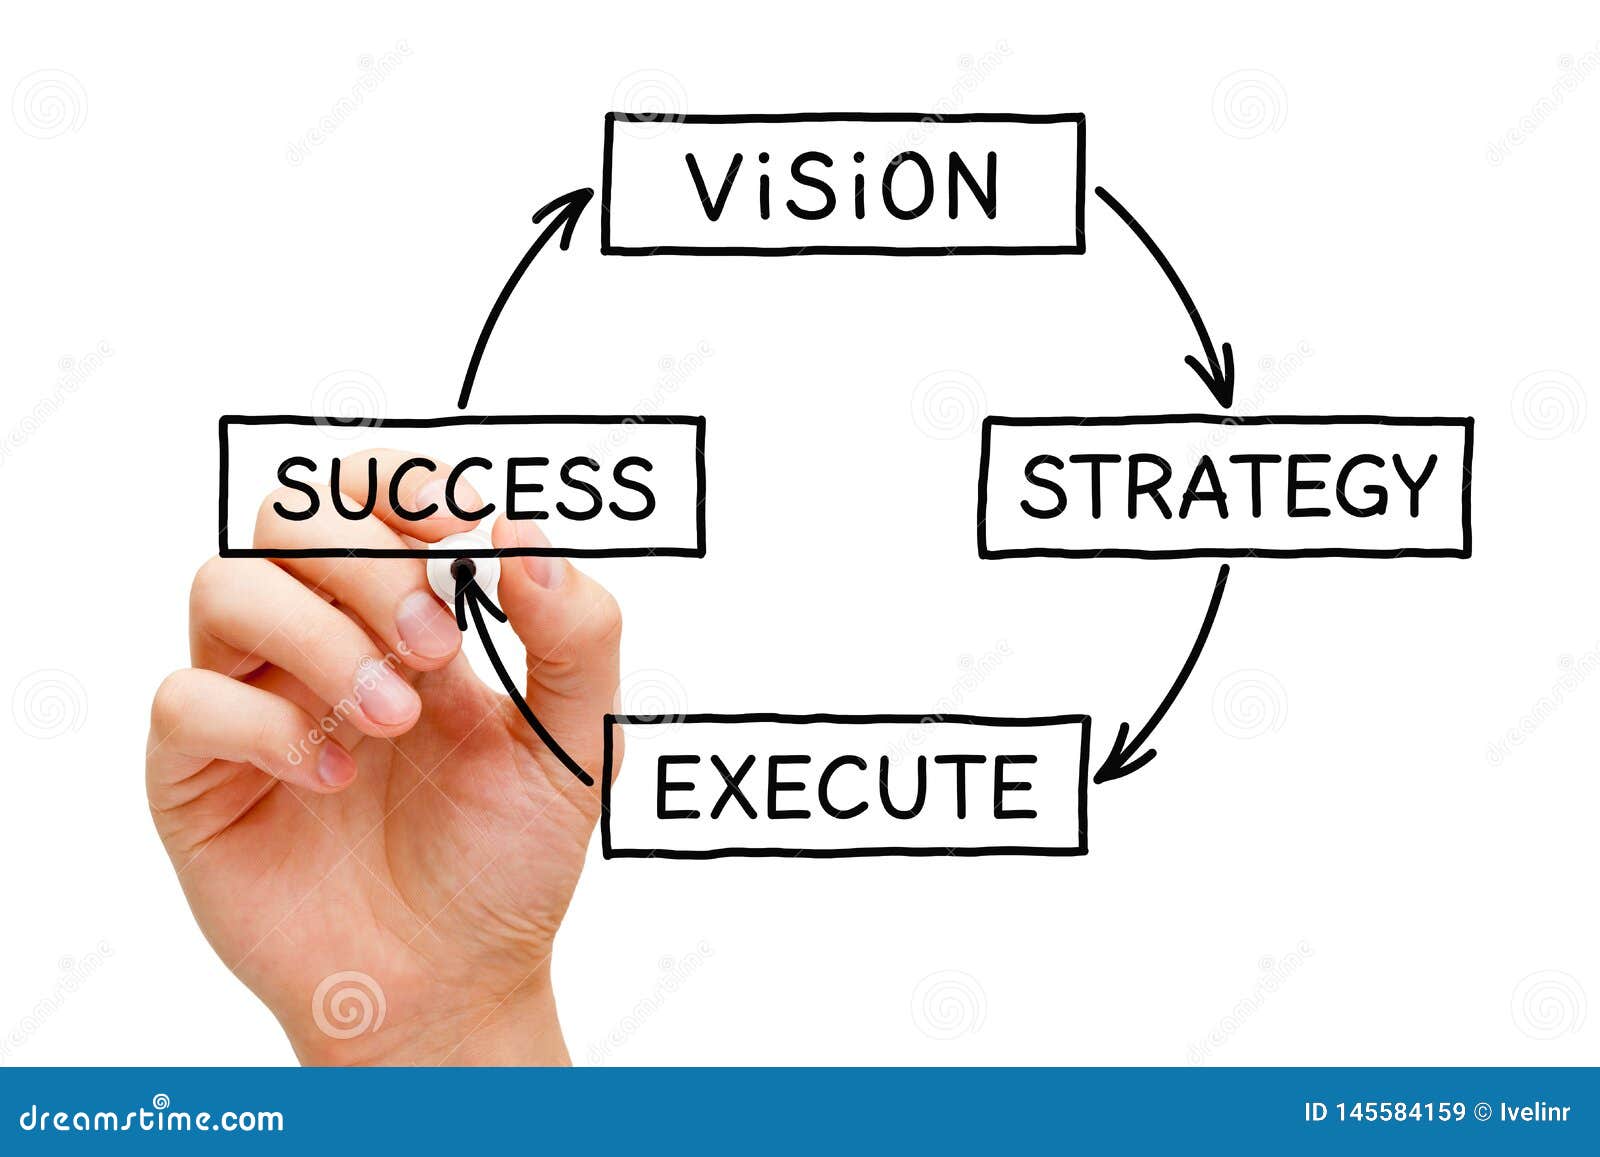 vision strategy execution success business concept